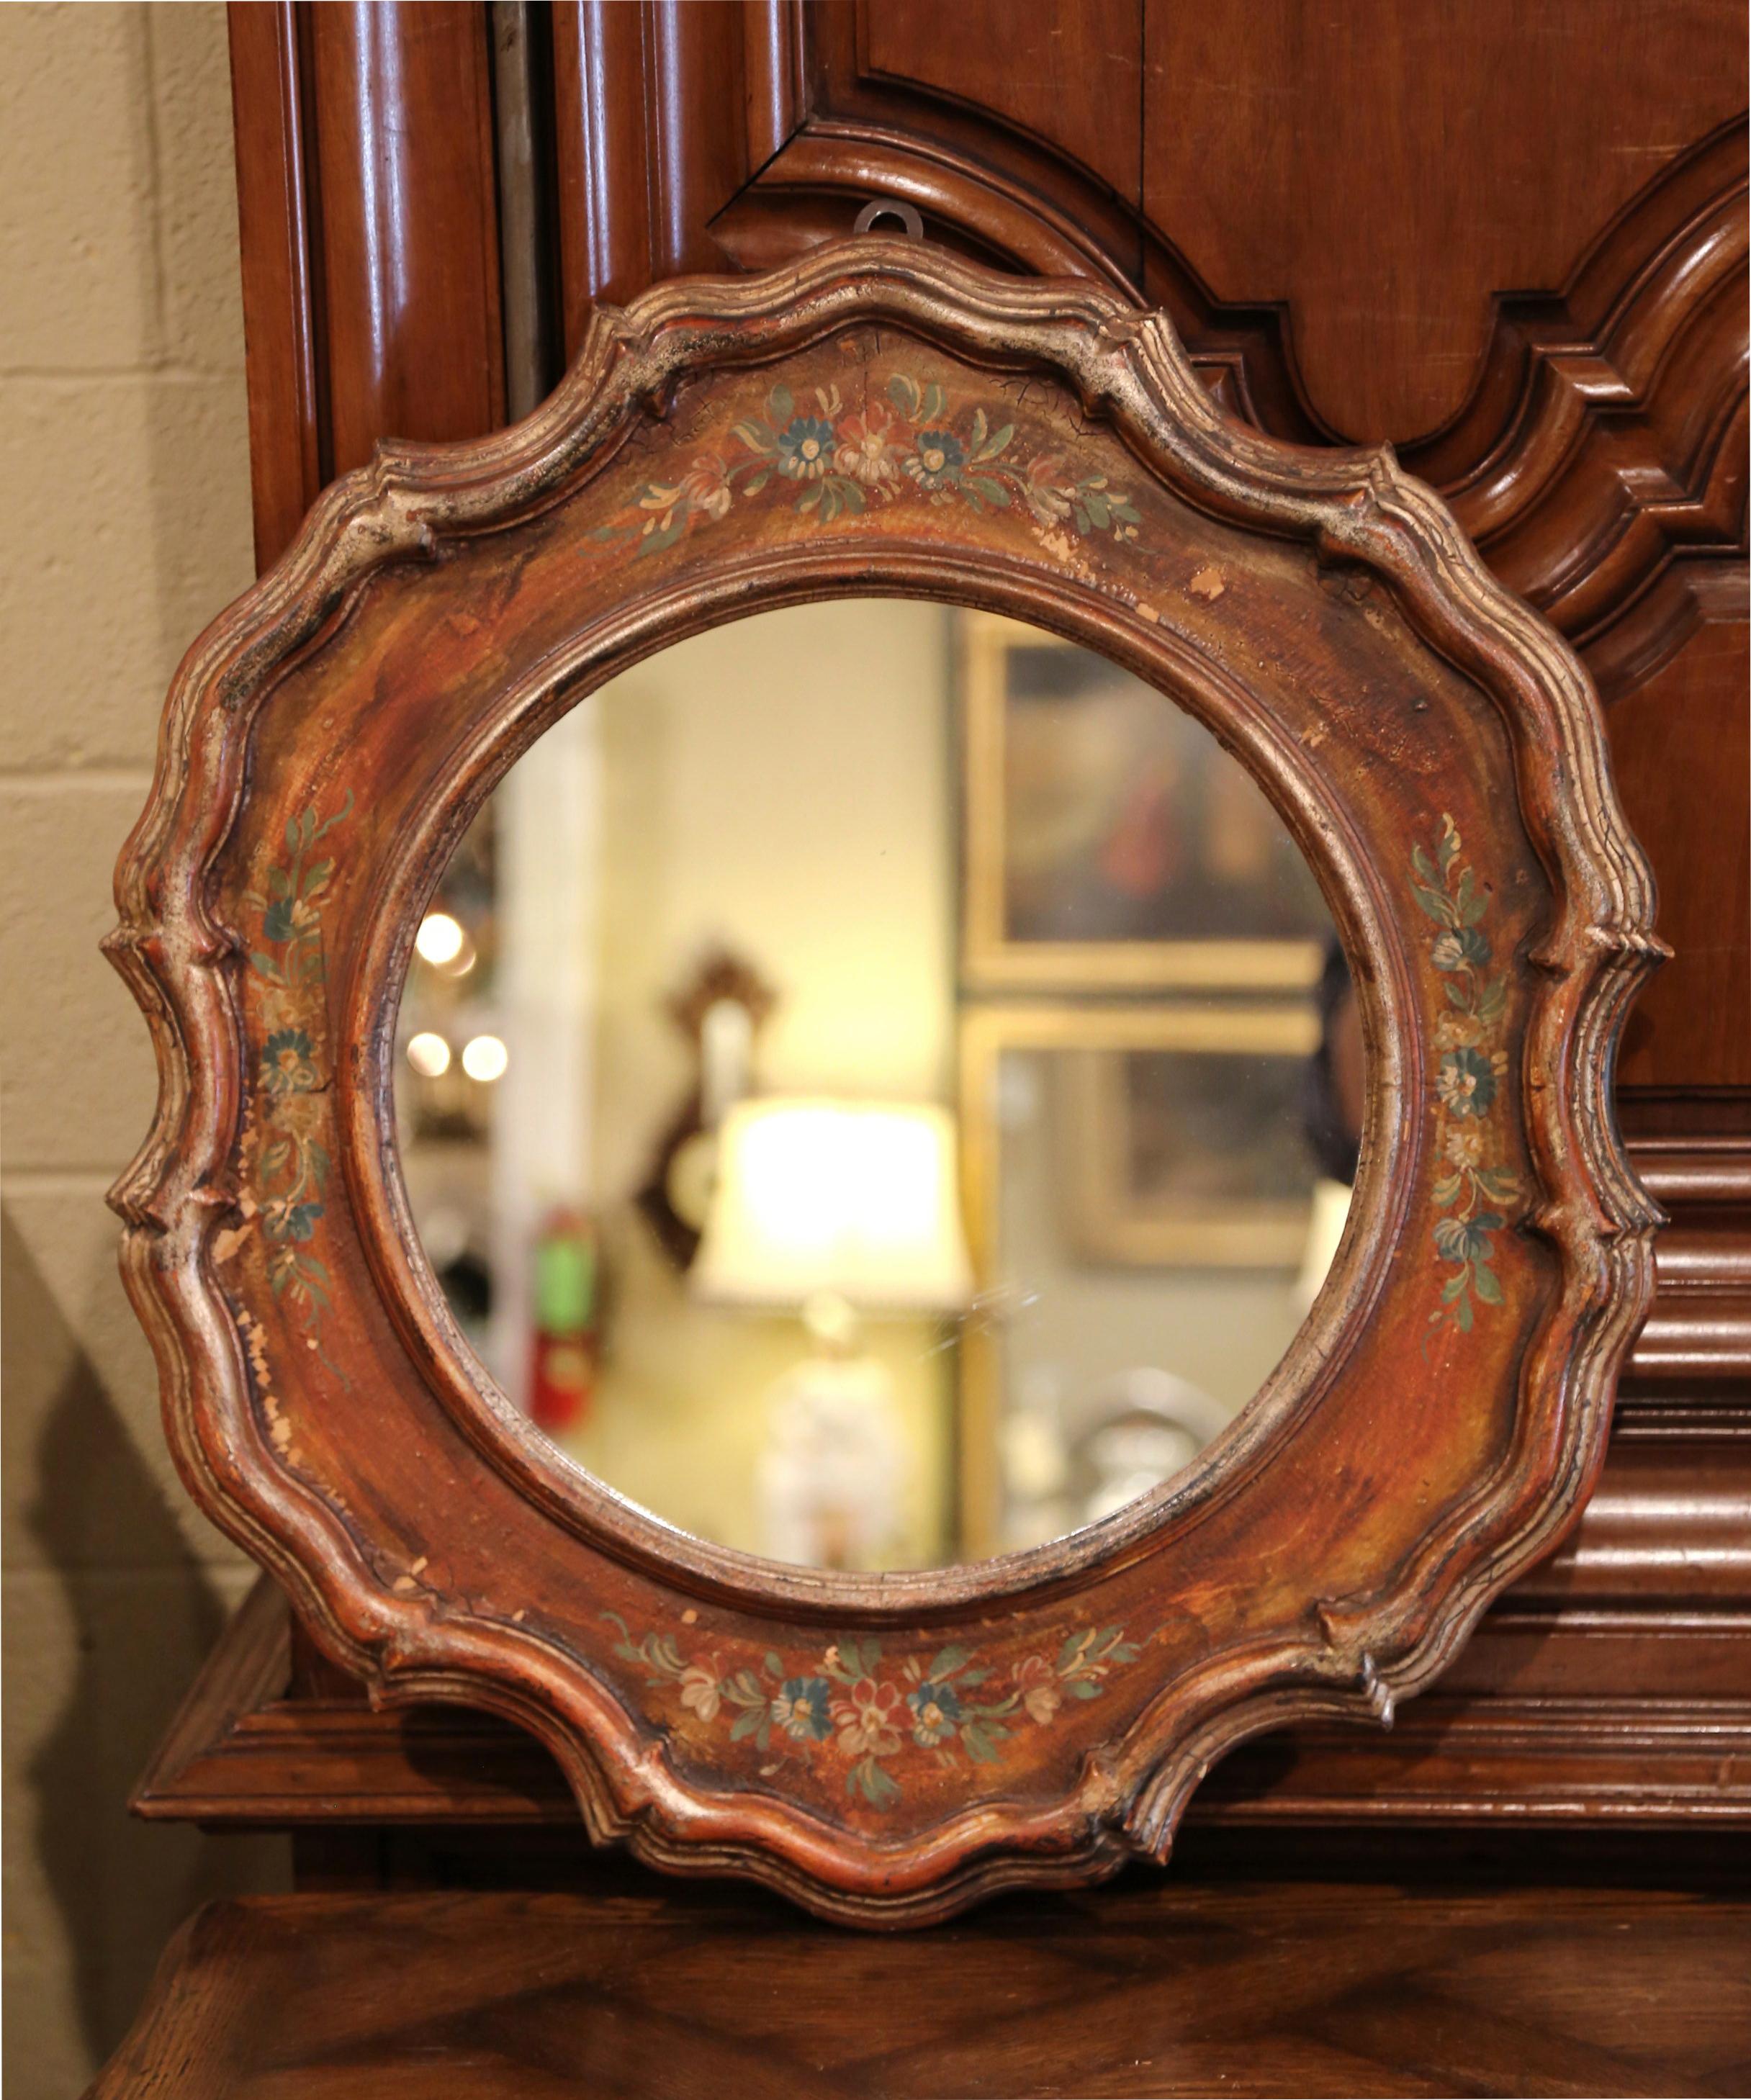 Napoleon III Mid-20th Century Italian Carved Hand Painted Wall Mirror with Floral Decor